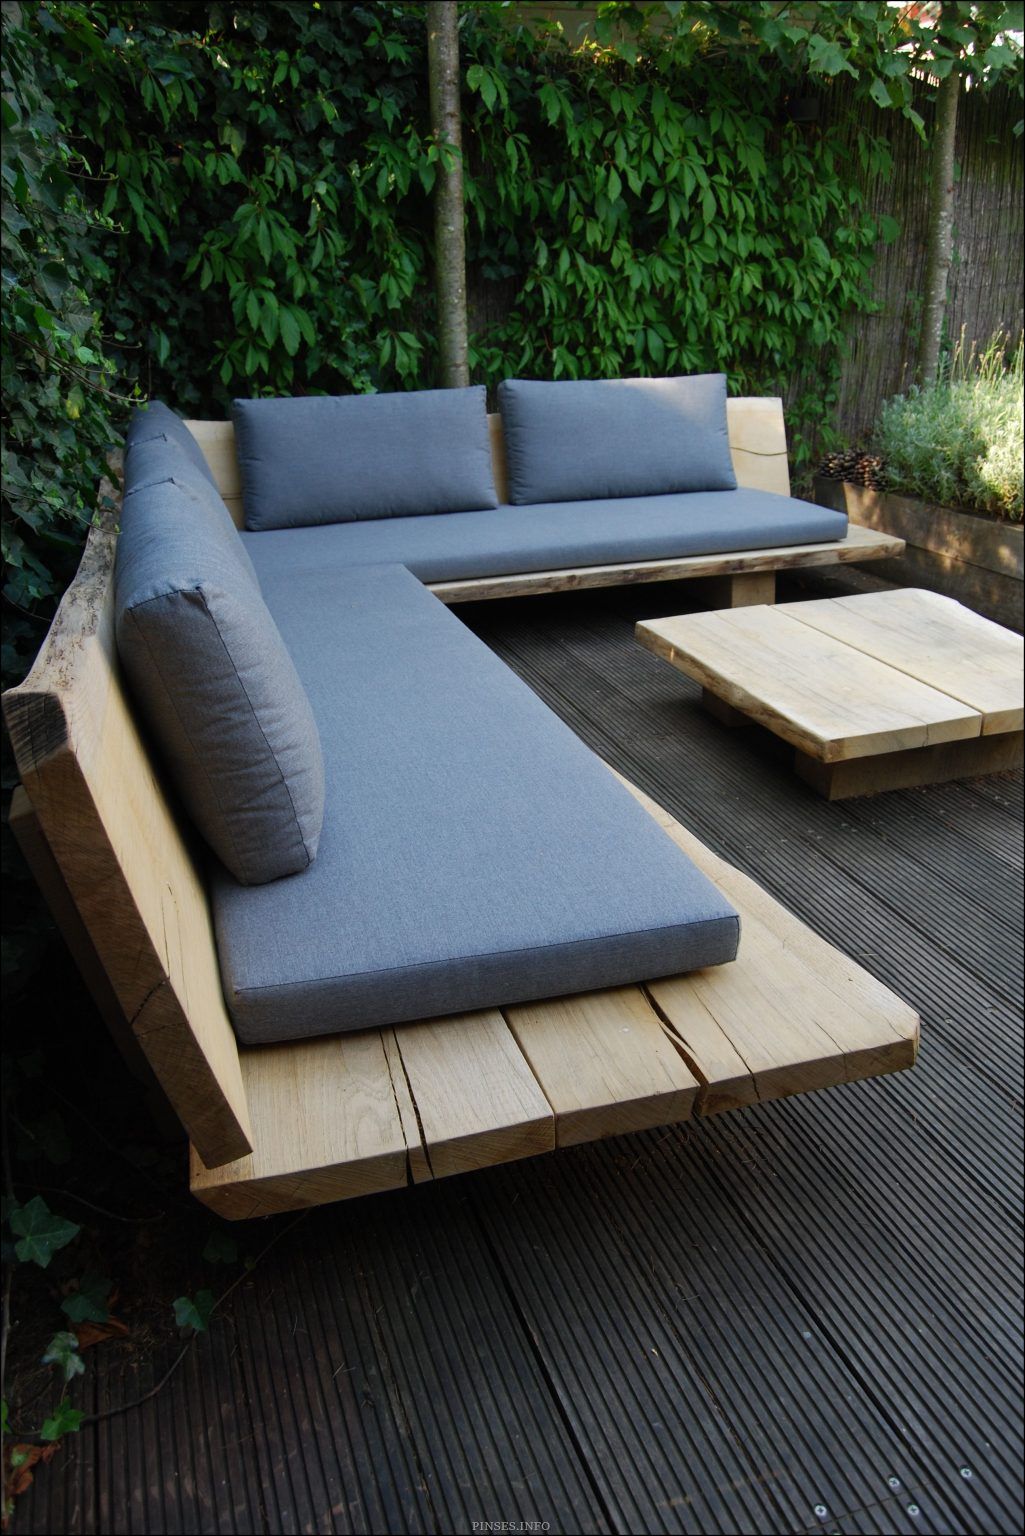 Choosing the Perfect Outdoor Bench for
Your Space